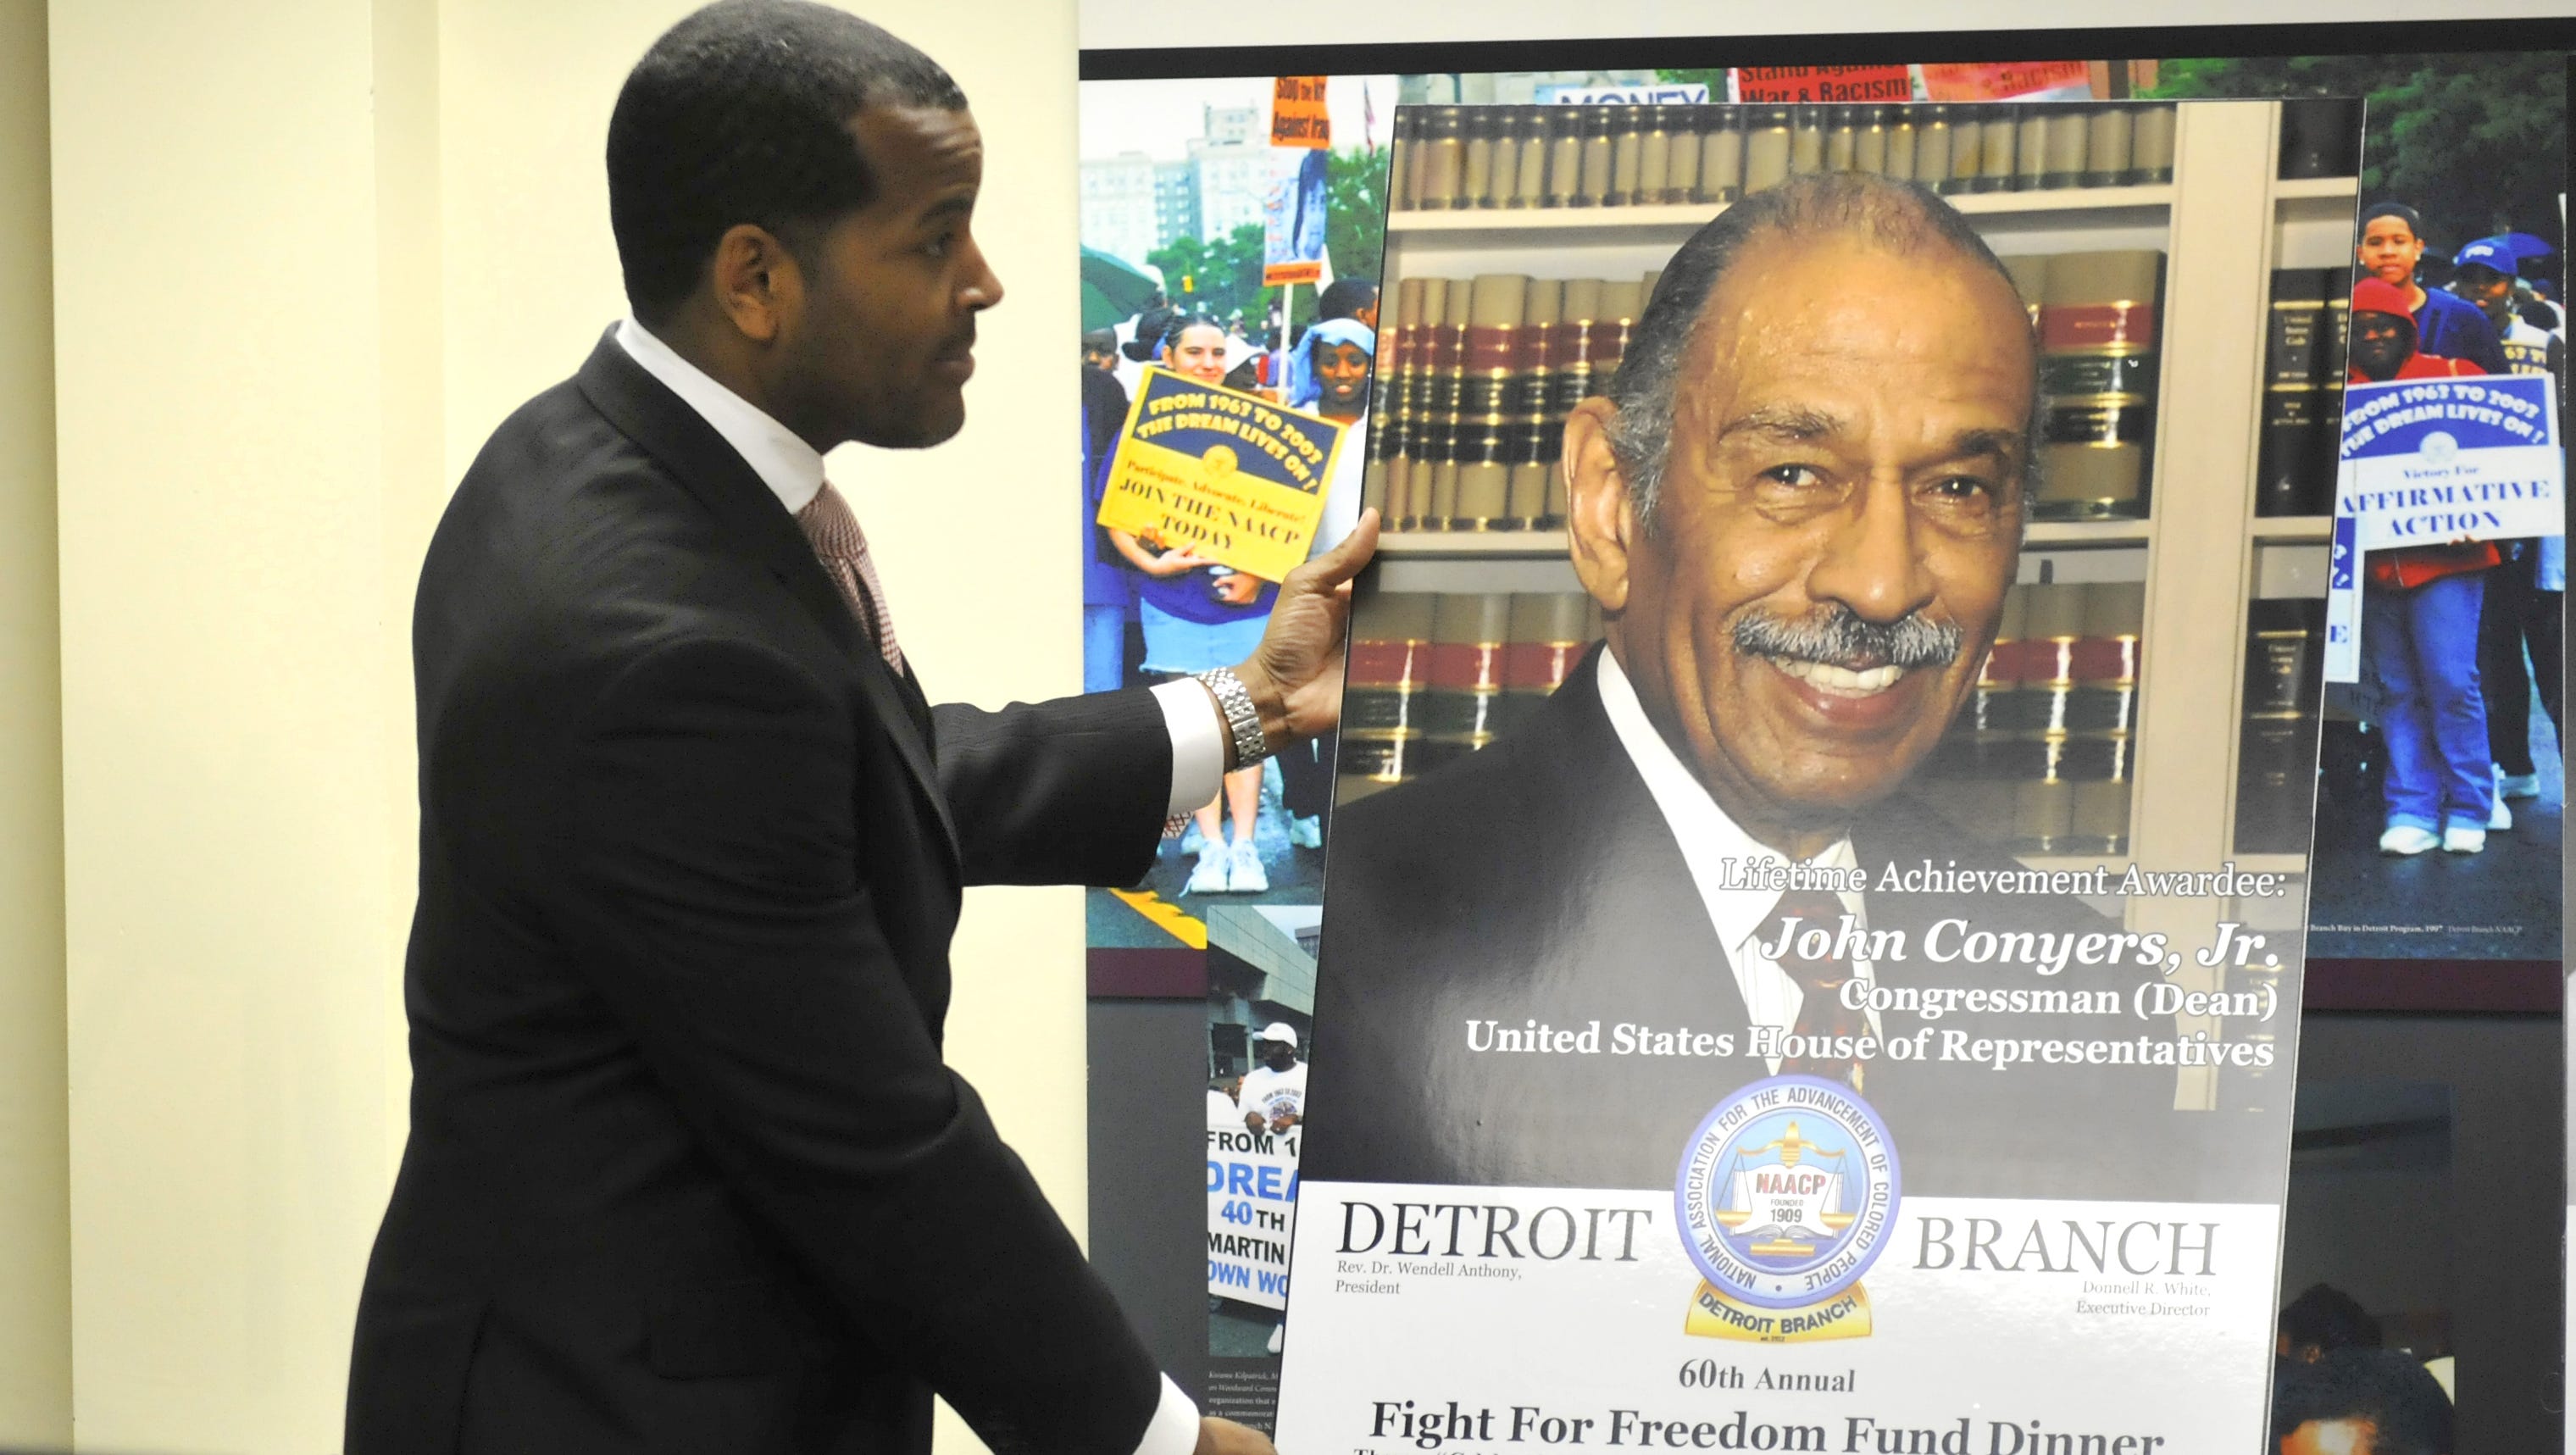 Donnell White, executive director of NAACP Detroit, unveils a poster of Conyers, naming him the honoree for the Lifetime Achievement Award at the 60th Annual Fight for Freedom Fund Dinner at Cobo Center in 2015.